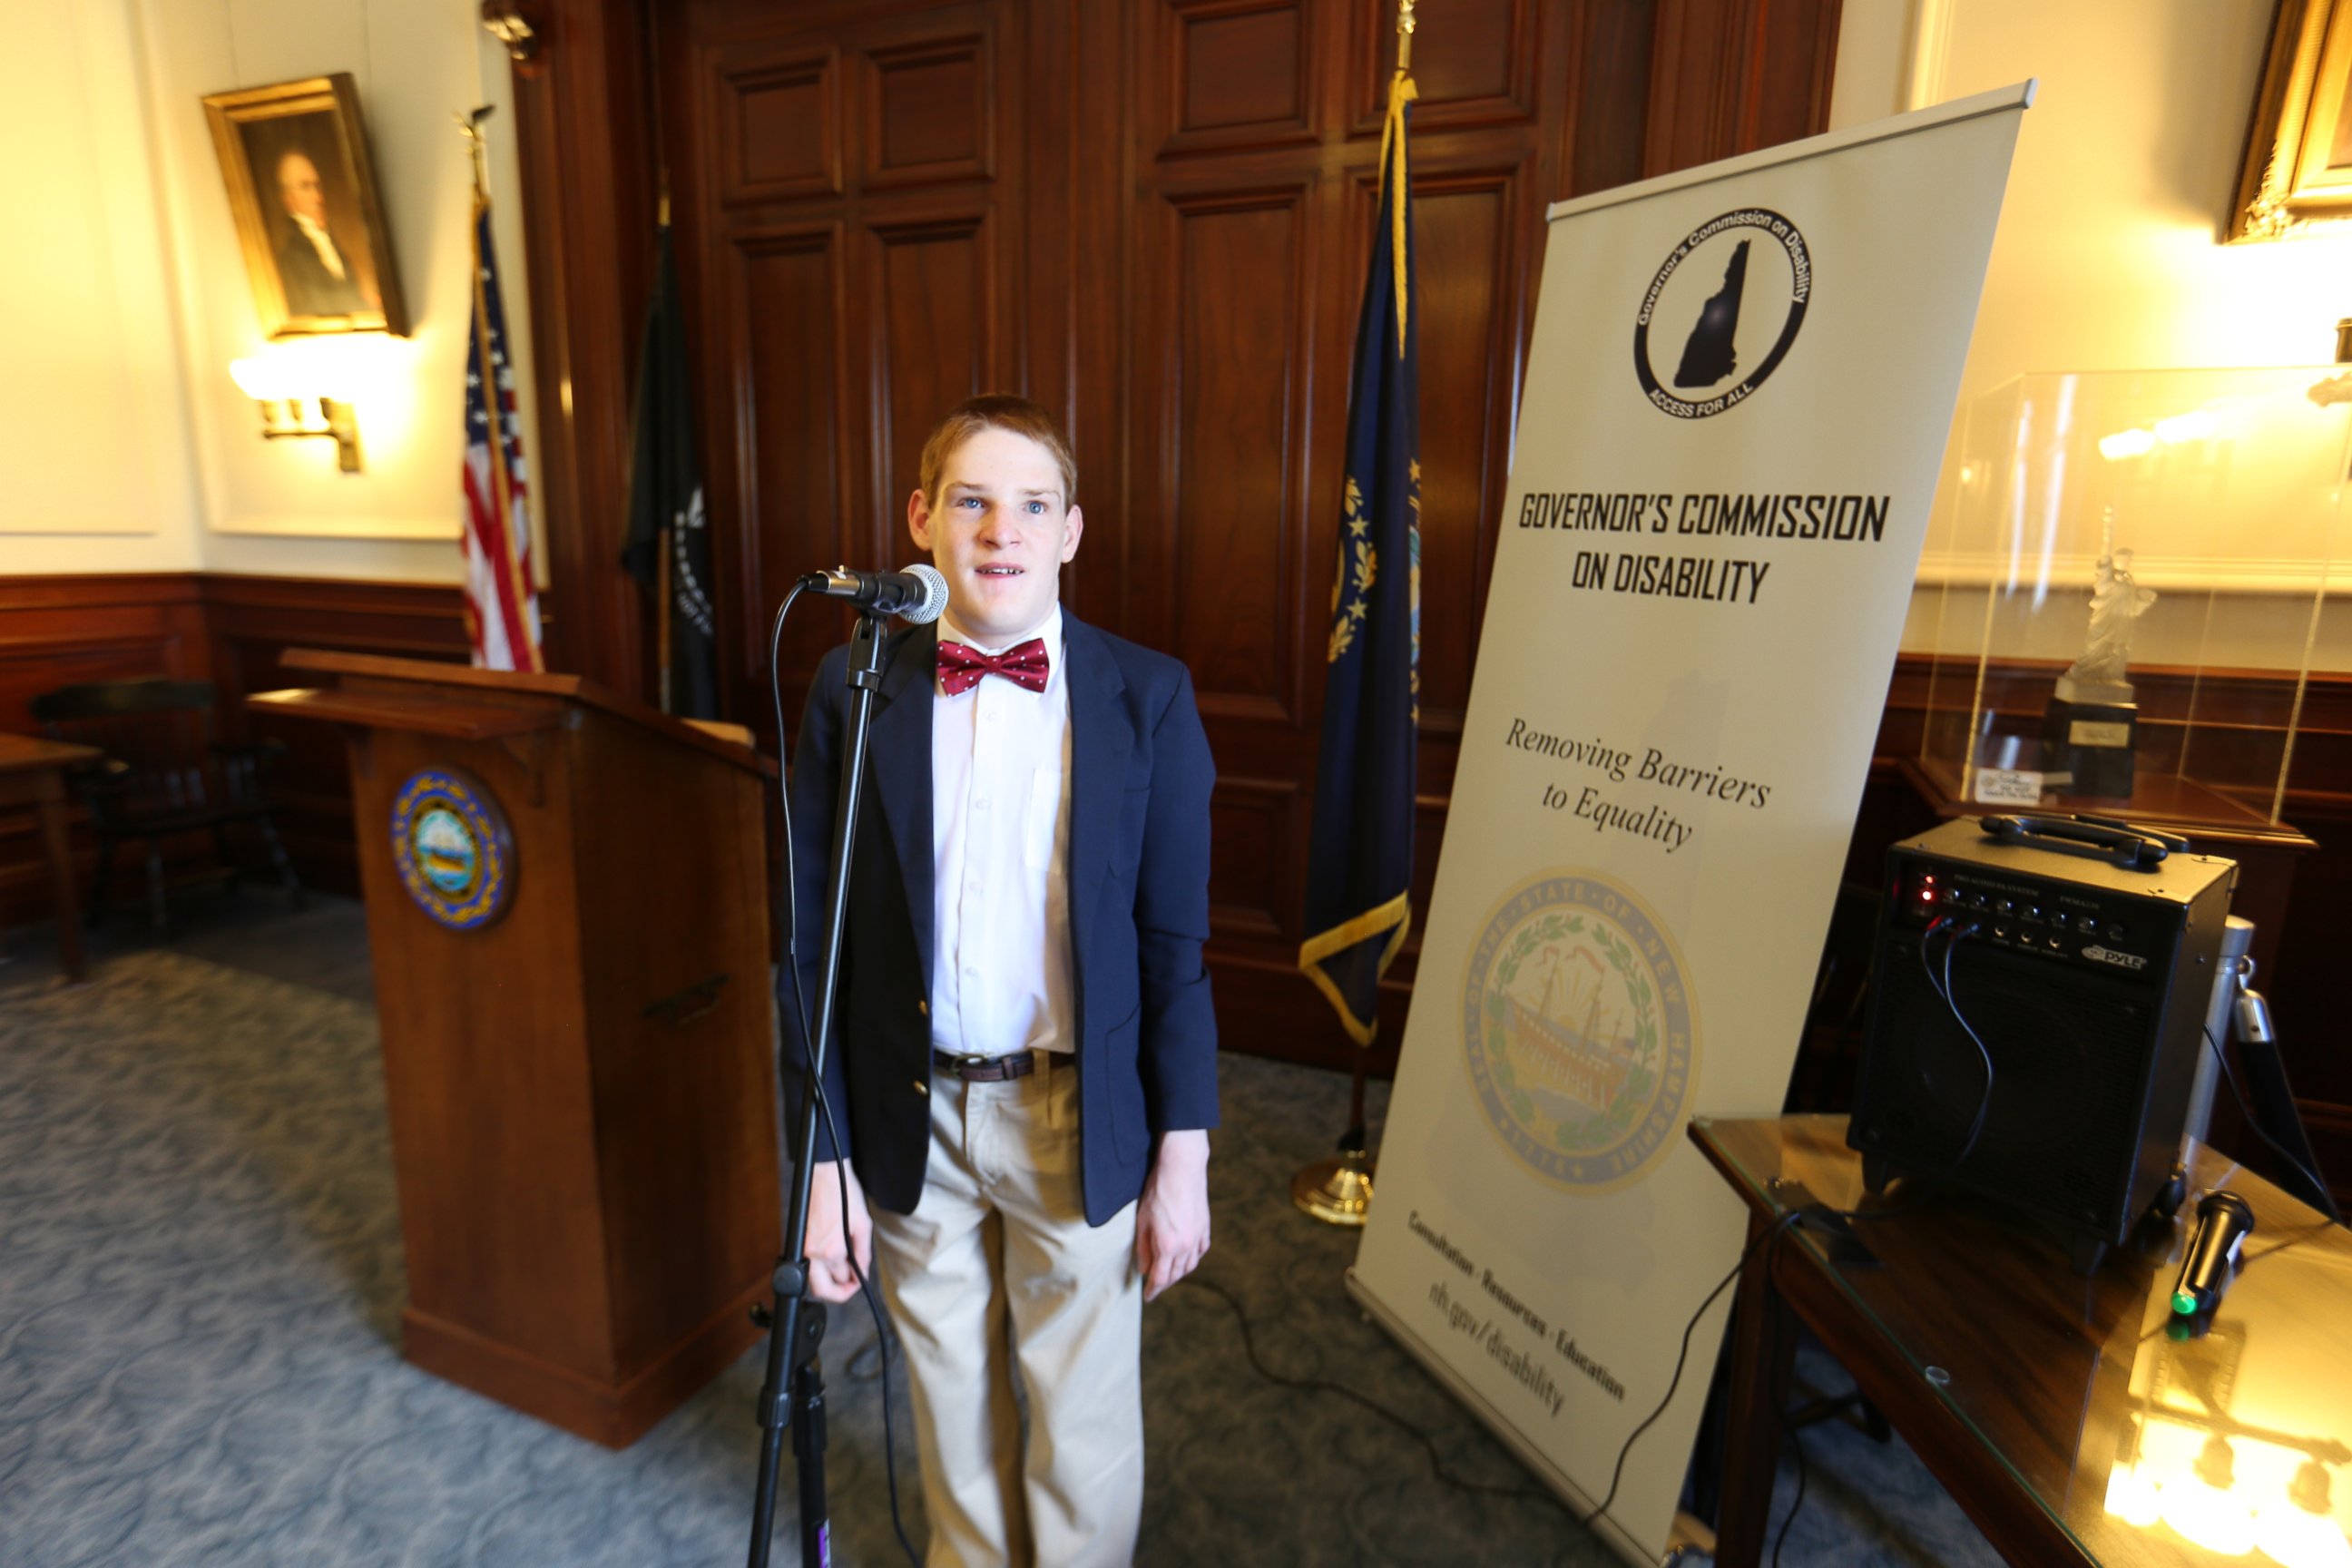 PHOTO: Christopher Duffley performing the Star-Spangled Banner at the New Hampshire Governor's Commission on Disability. Concord, NH. July 27, 2016. 
